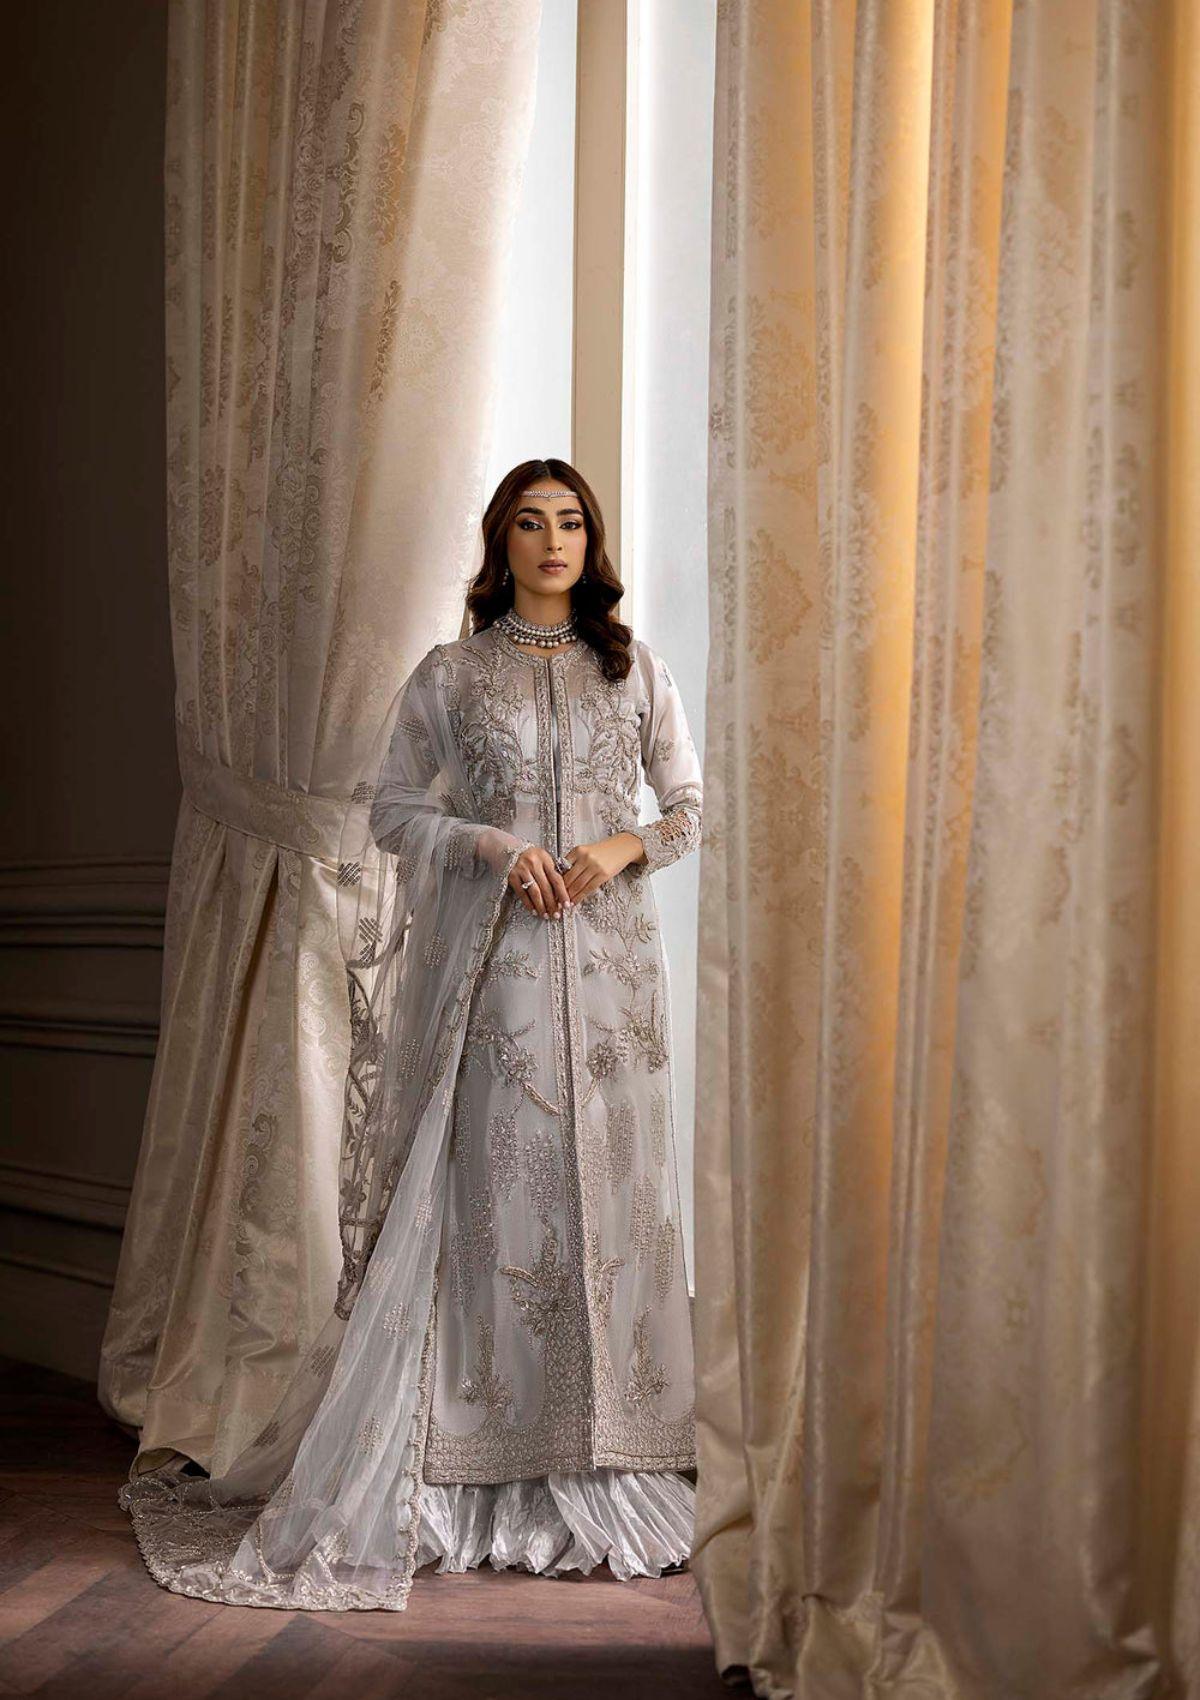 Nuriyaa Rozanne Festive'22 -HALENA is available at Mohsin Saeed Fabrics. ✓ shop online  all the top women clothing brands in pakistan ✓ Amazing Price and Offers ✓ Free Shipping ✓ Cash on Delivery ✓ formal & Wedding Collections 